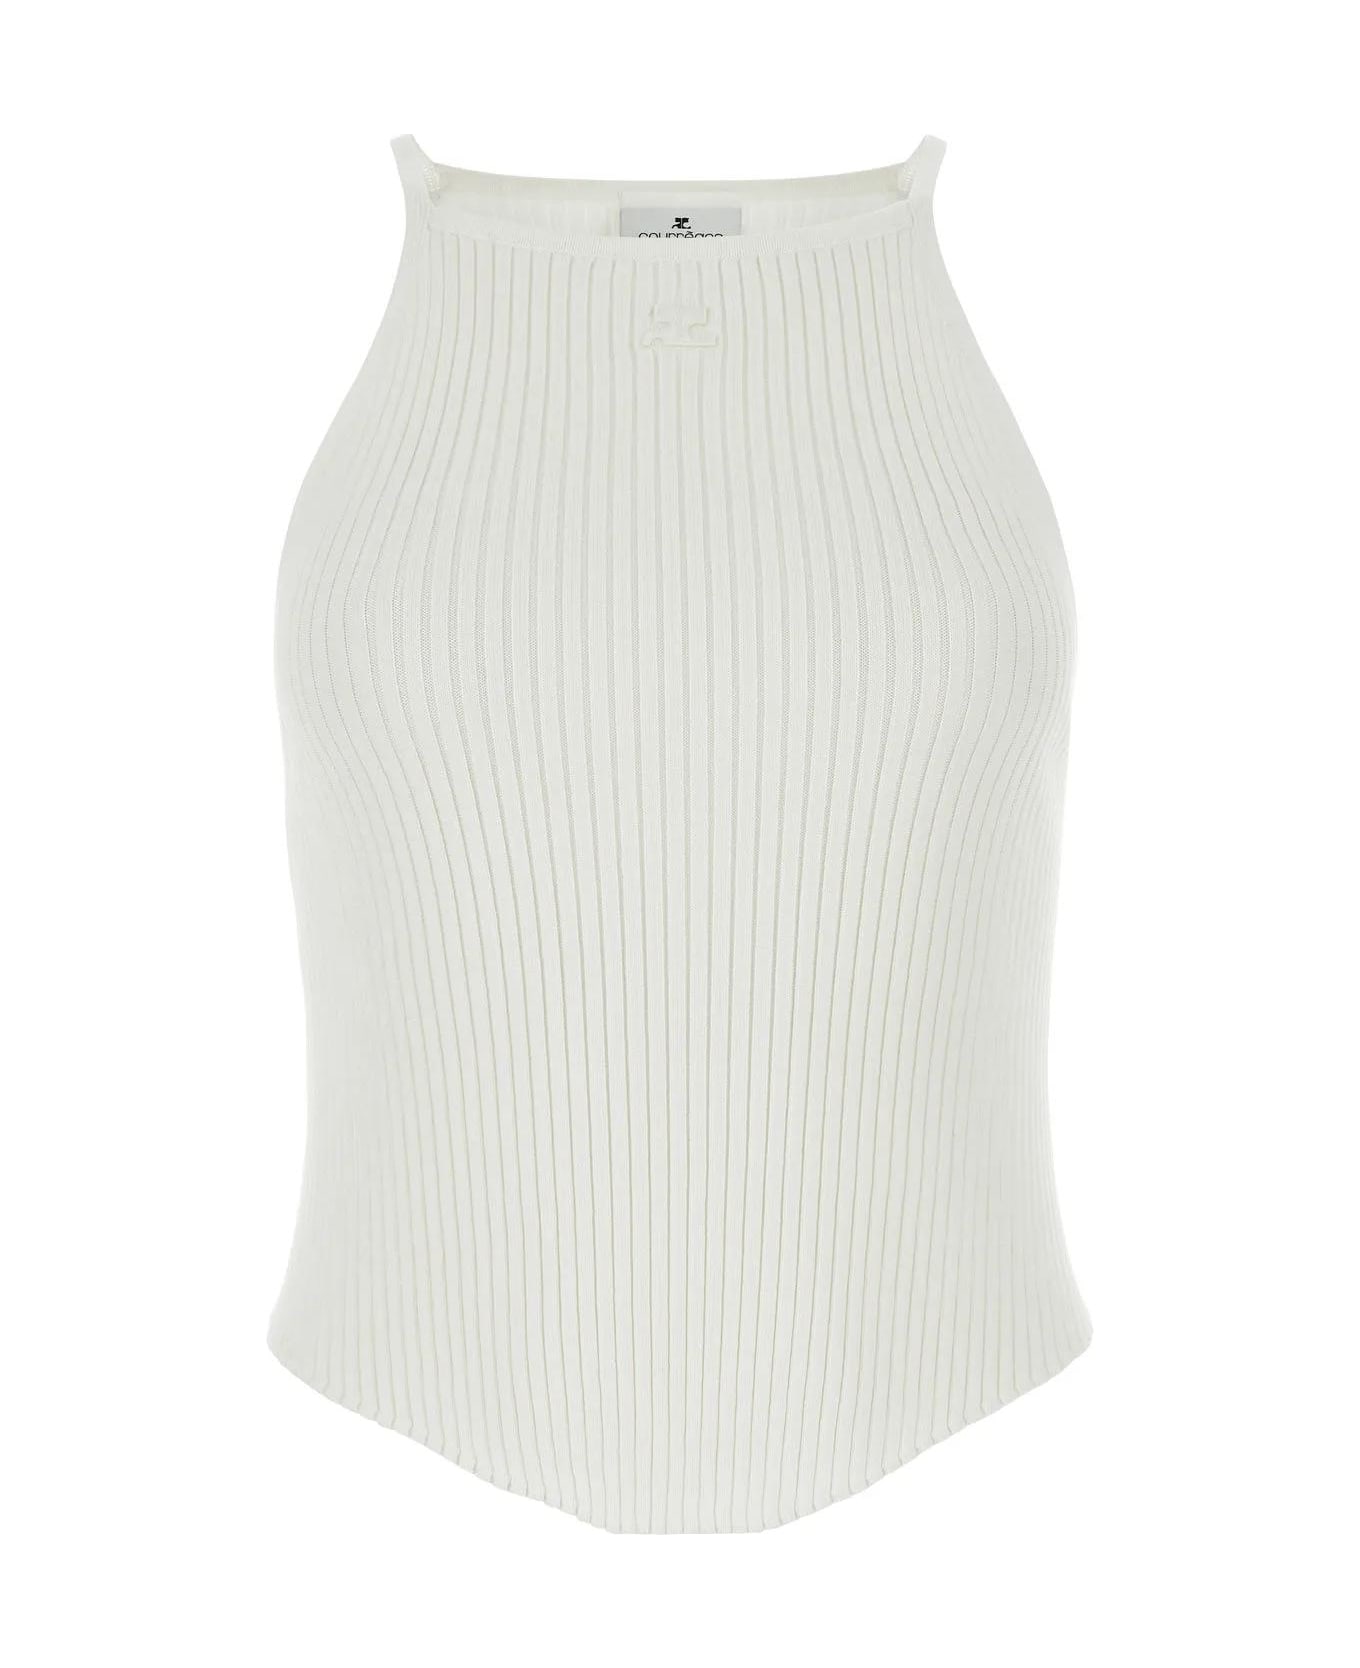 Courrèges White Viscose Blend Top - Heritage White